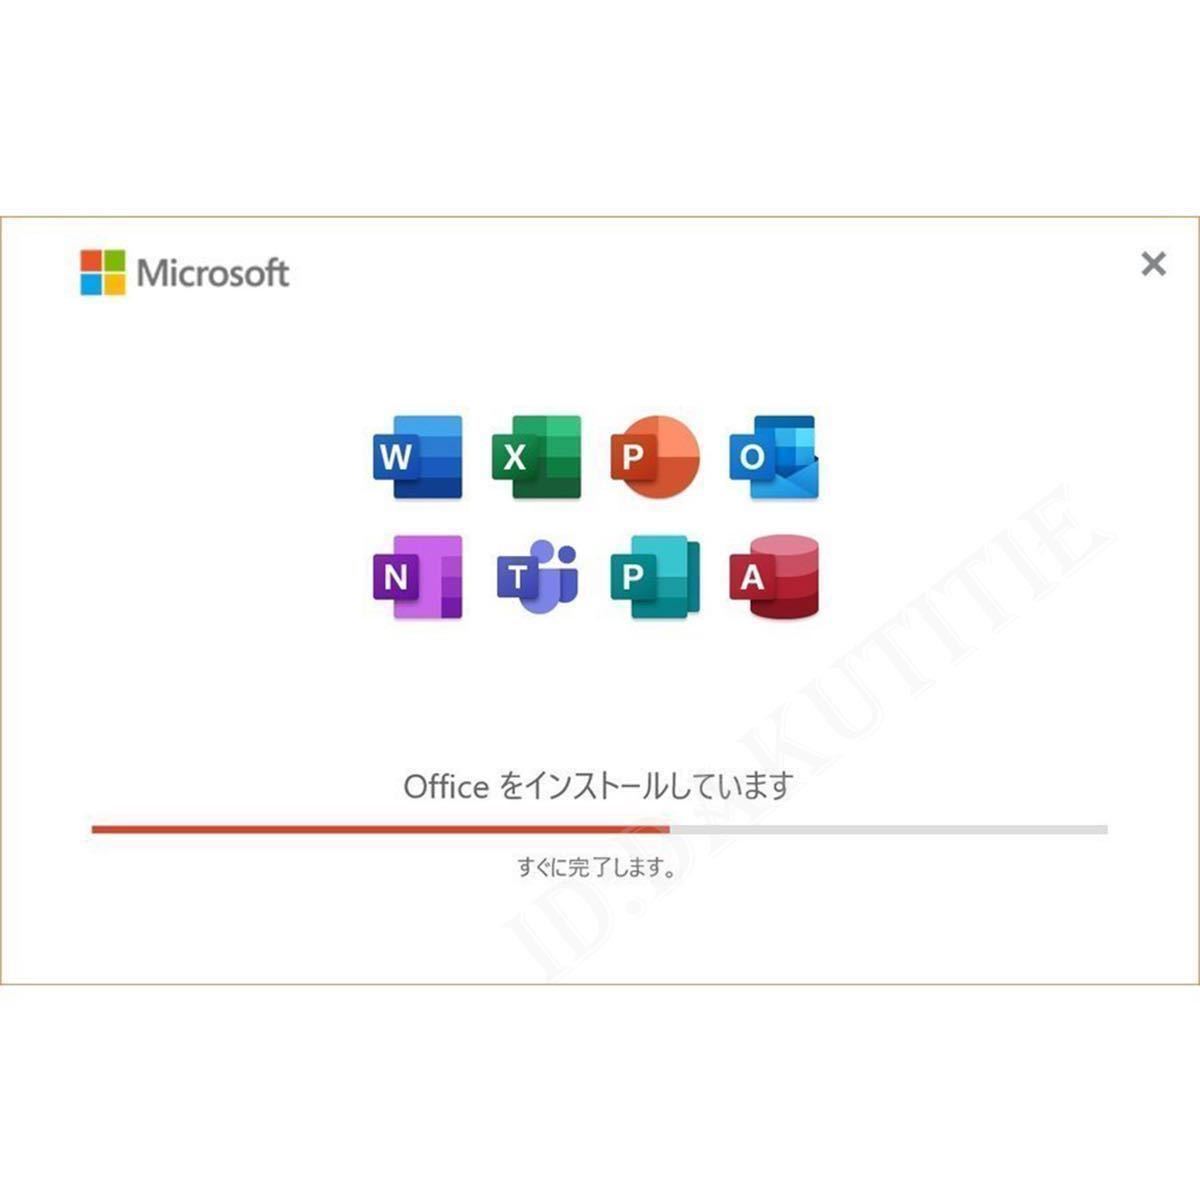 2 stand amount Microsoft Office 2021 Professional Plus office 2021 Pro duct key regular Word Excel Japanese edition manual equipped download version 5